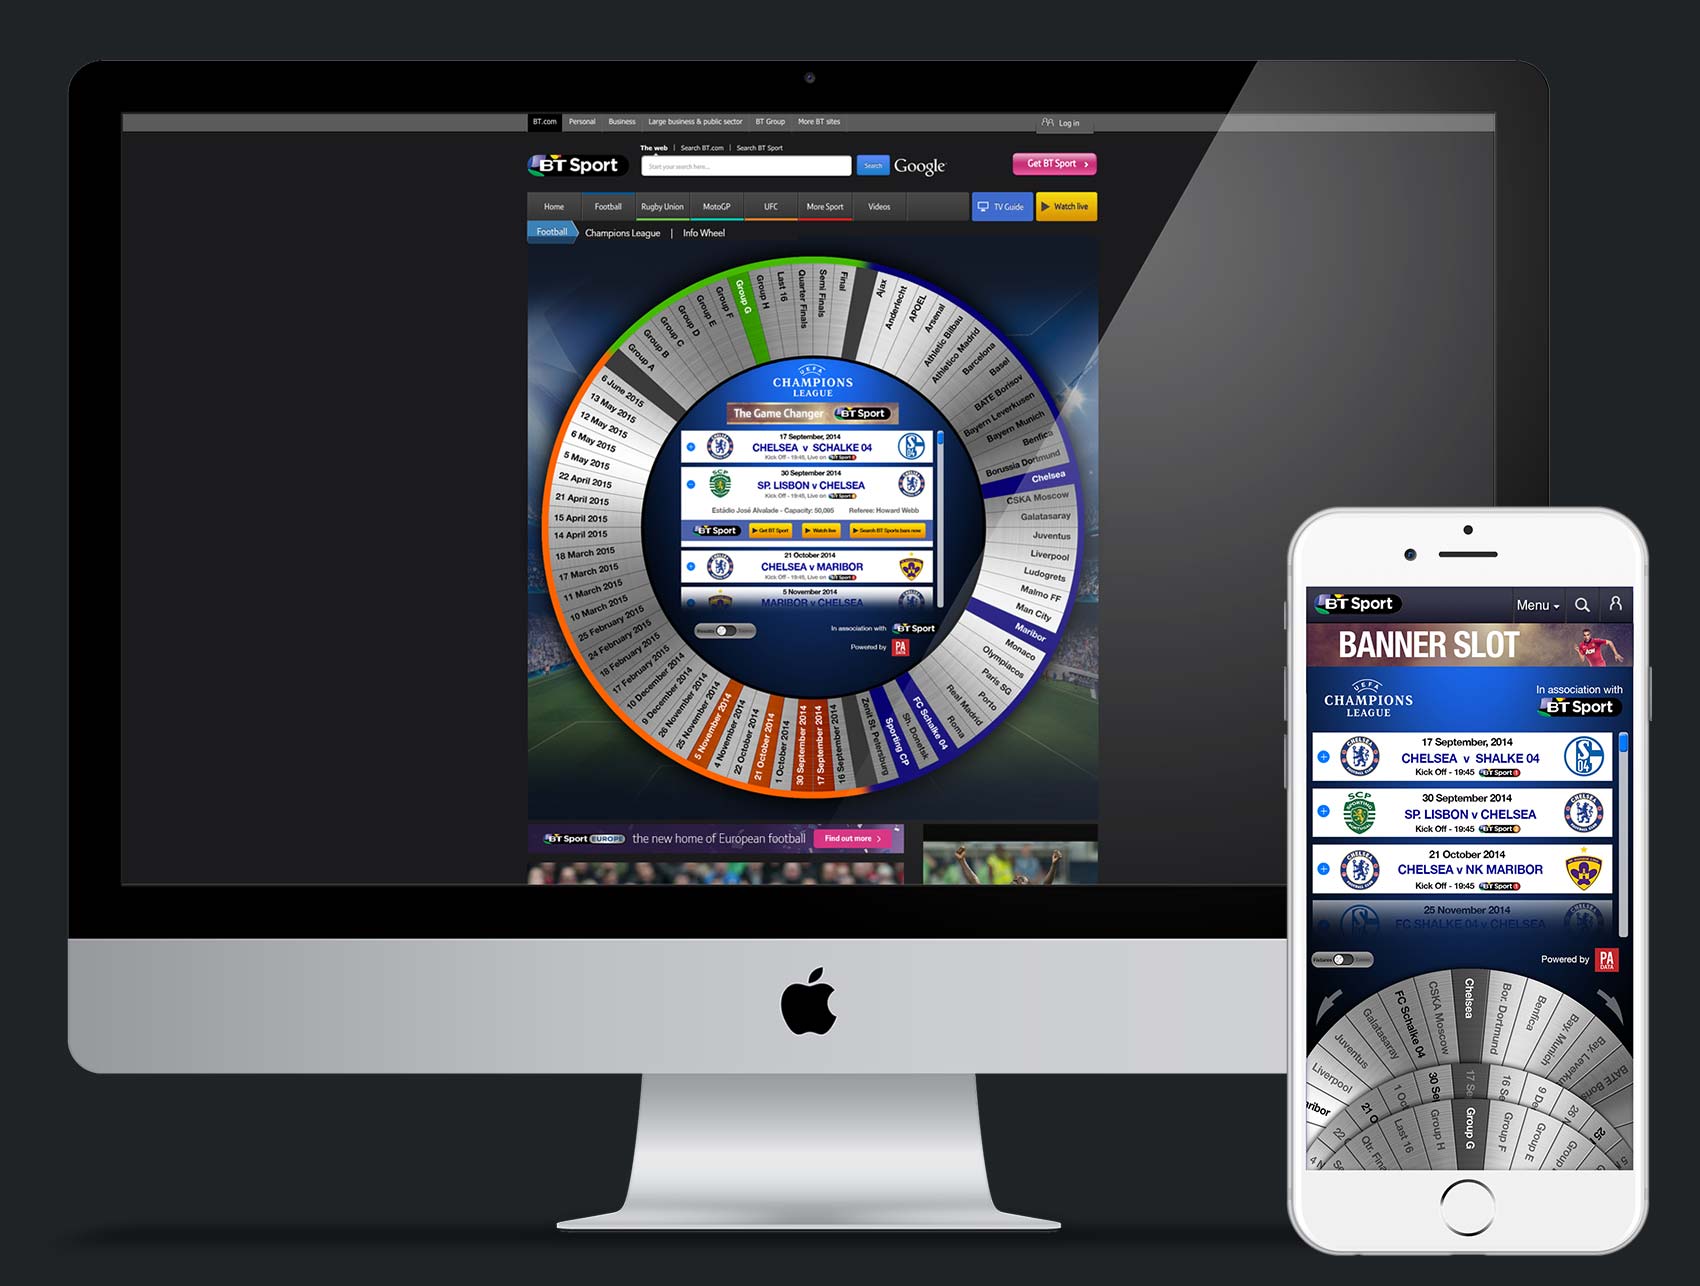 Fixture Wheel. A concept which was made to pitch. An interactive digital product which serves as an easy way to "Scan" fixtures for events such as the World Cup or Olympics